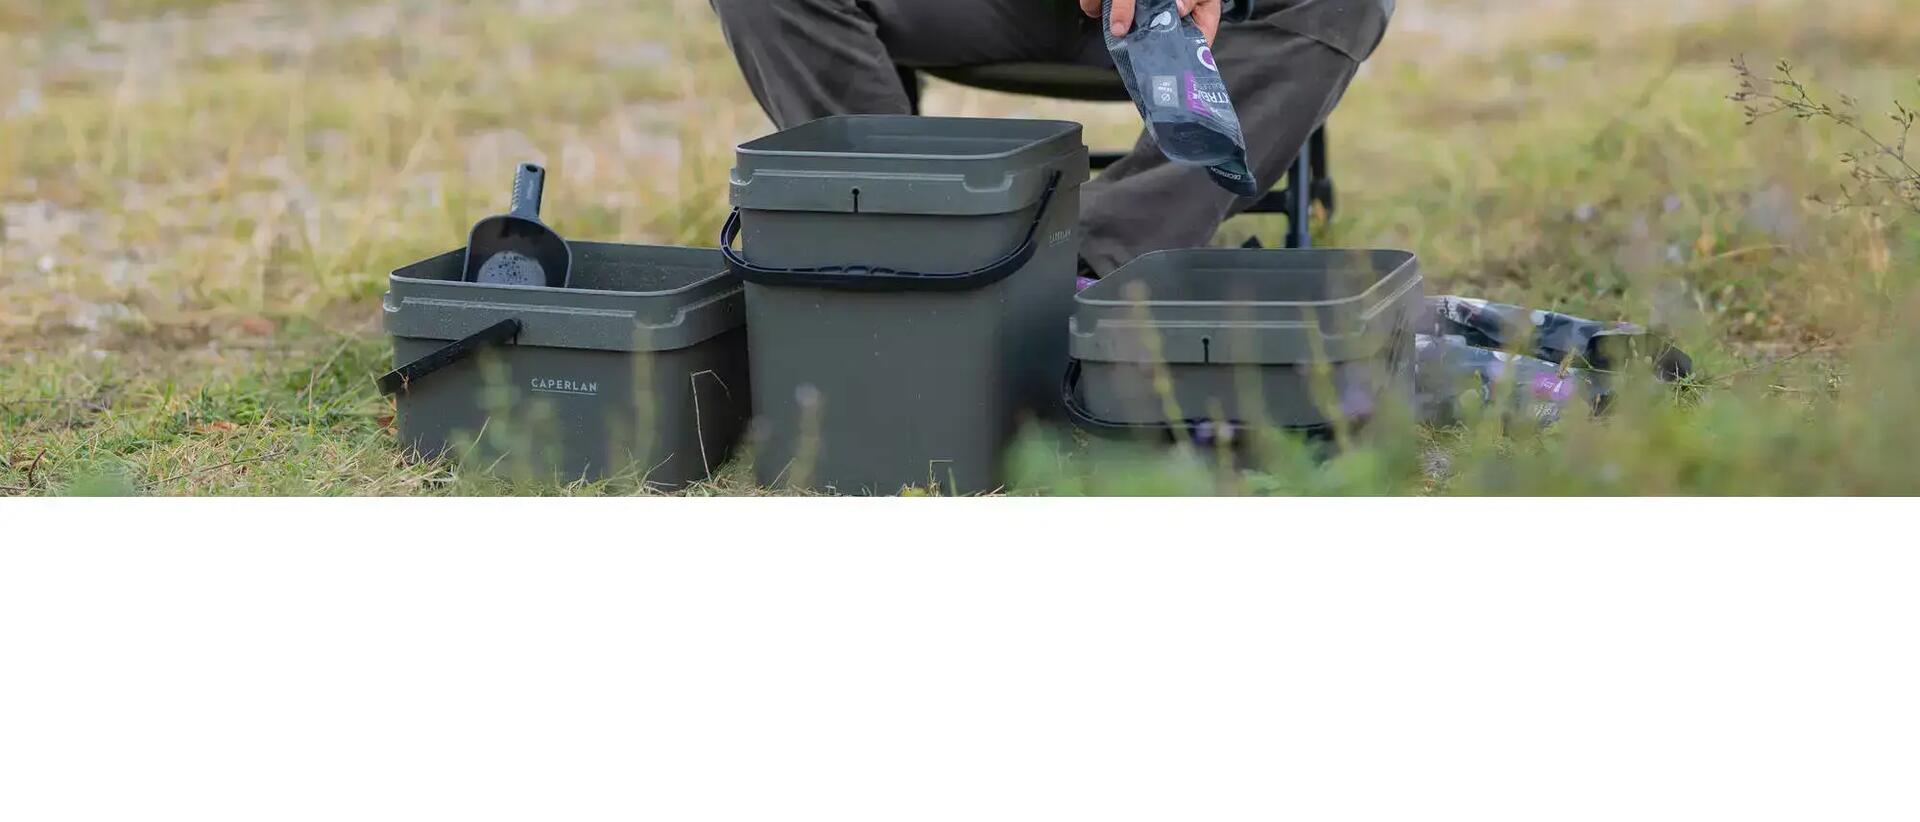 Man putting bait into boxes